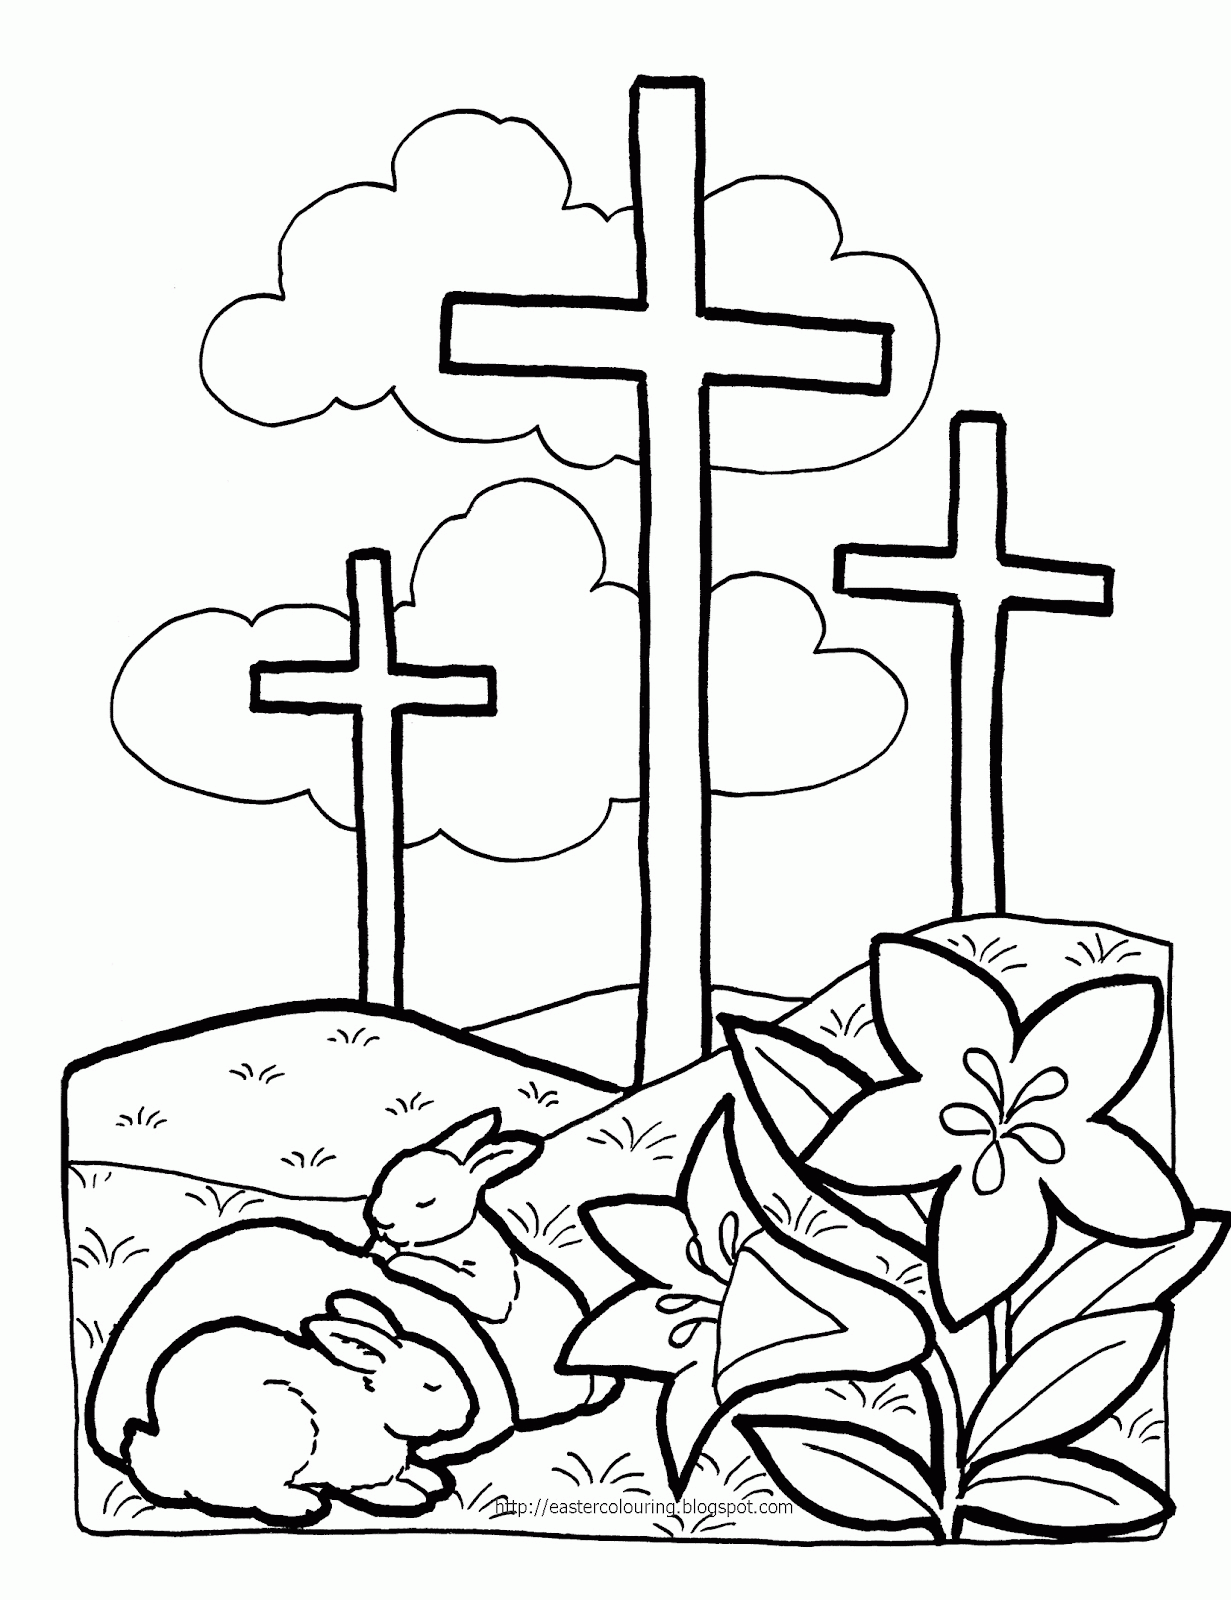 Jesus Easter Coloring Pages To Print Religious Easter Colouring ...